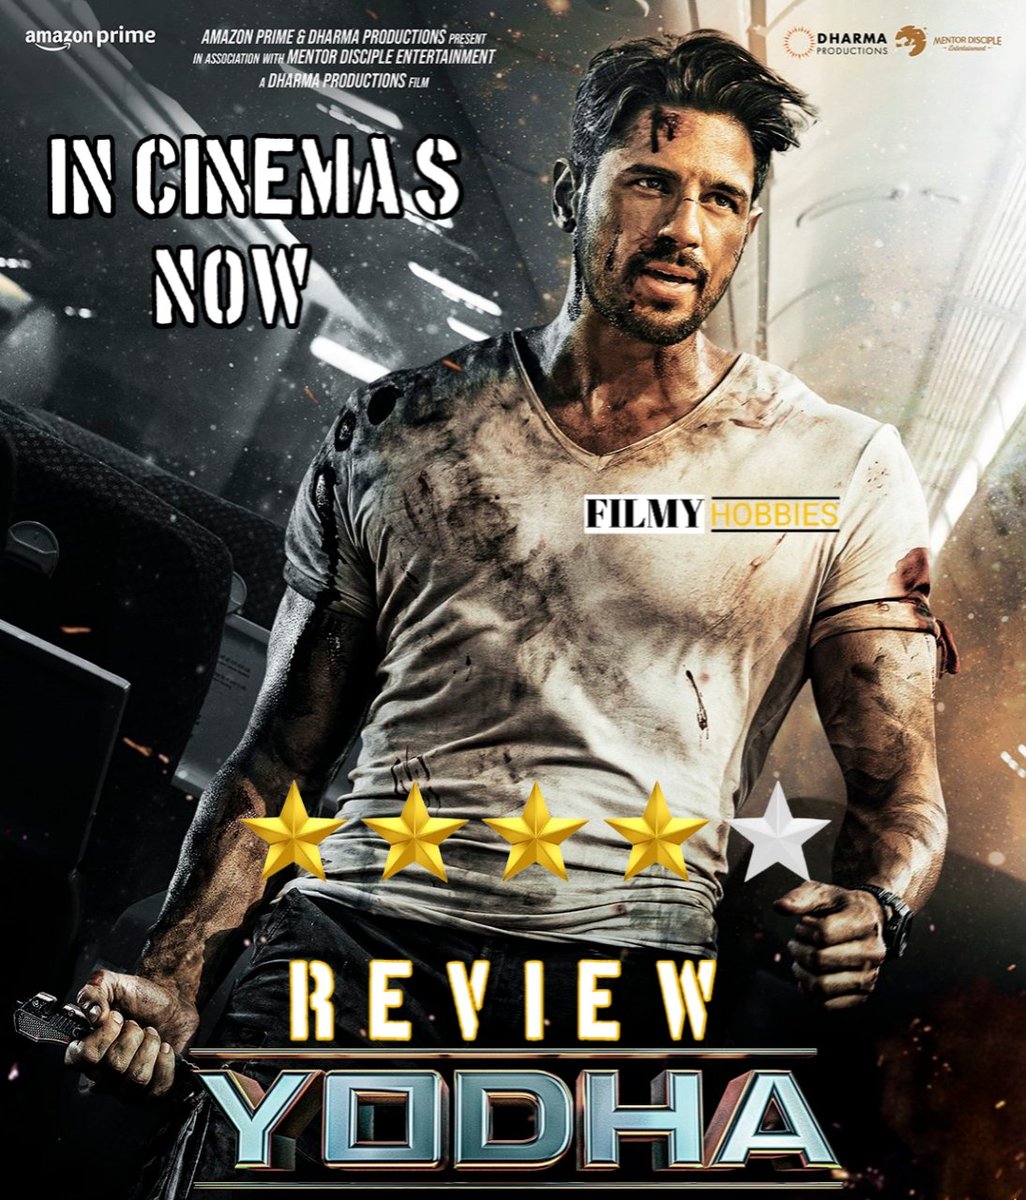 #YodhaReview the powerfull storyline, and amazing direction. in theatre audiance clapping in every scene's. Casting Superb. #SidharthMalhotra Outstanding Performance and #DishaPatani Too Good It's a SuperHit. #Yodha @SidMalhotra @DishPatani